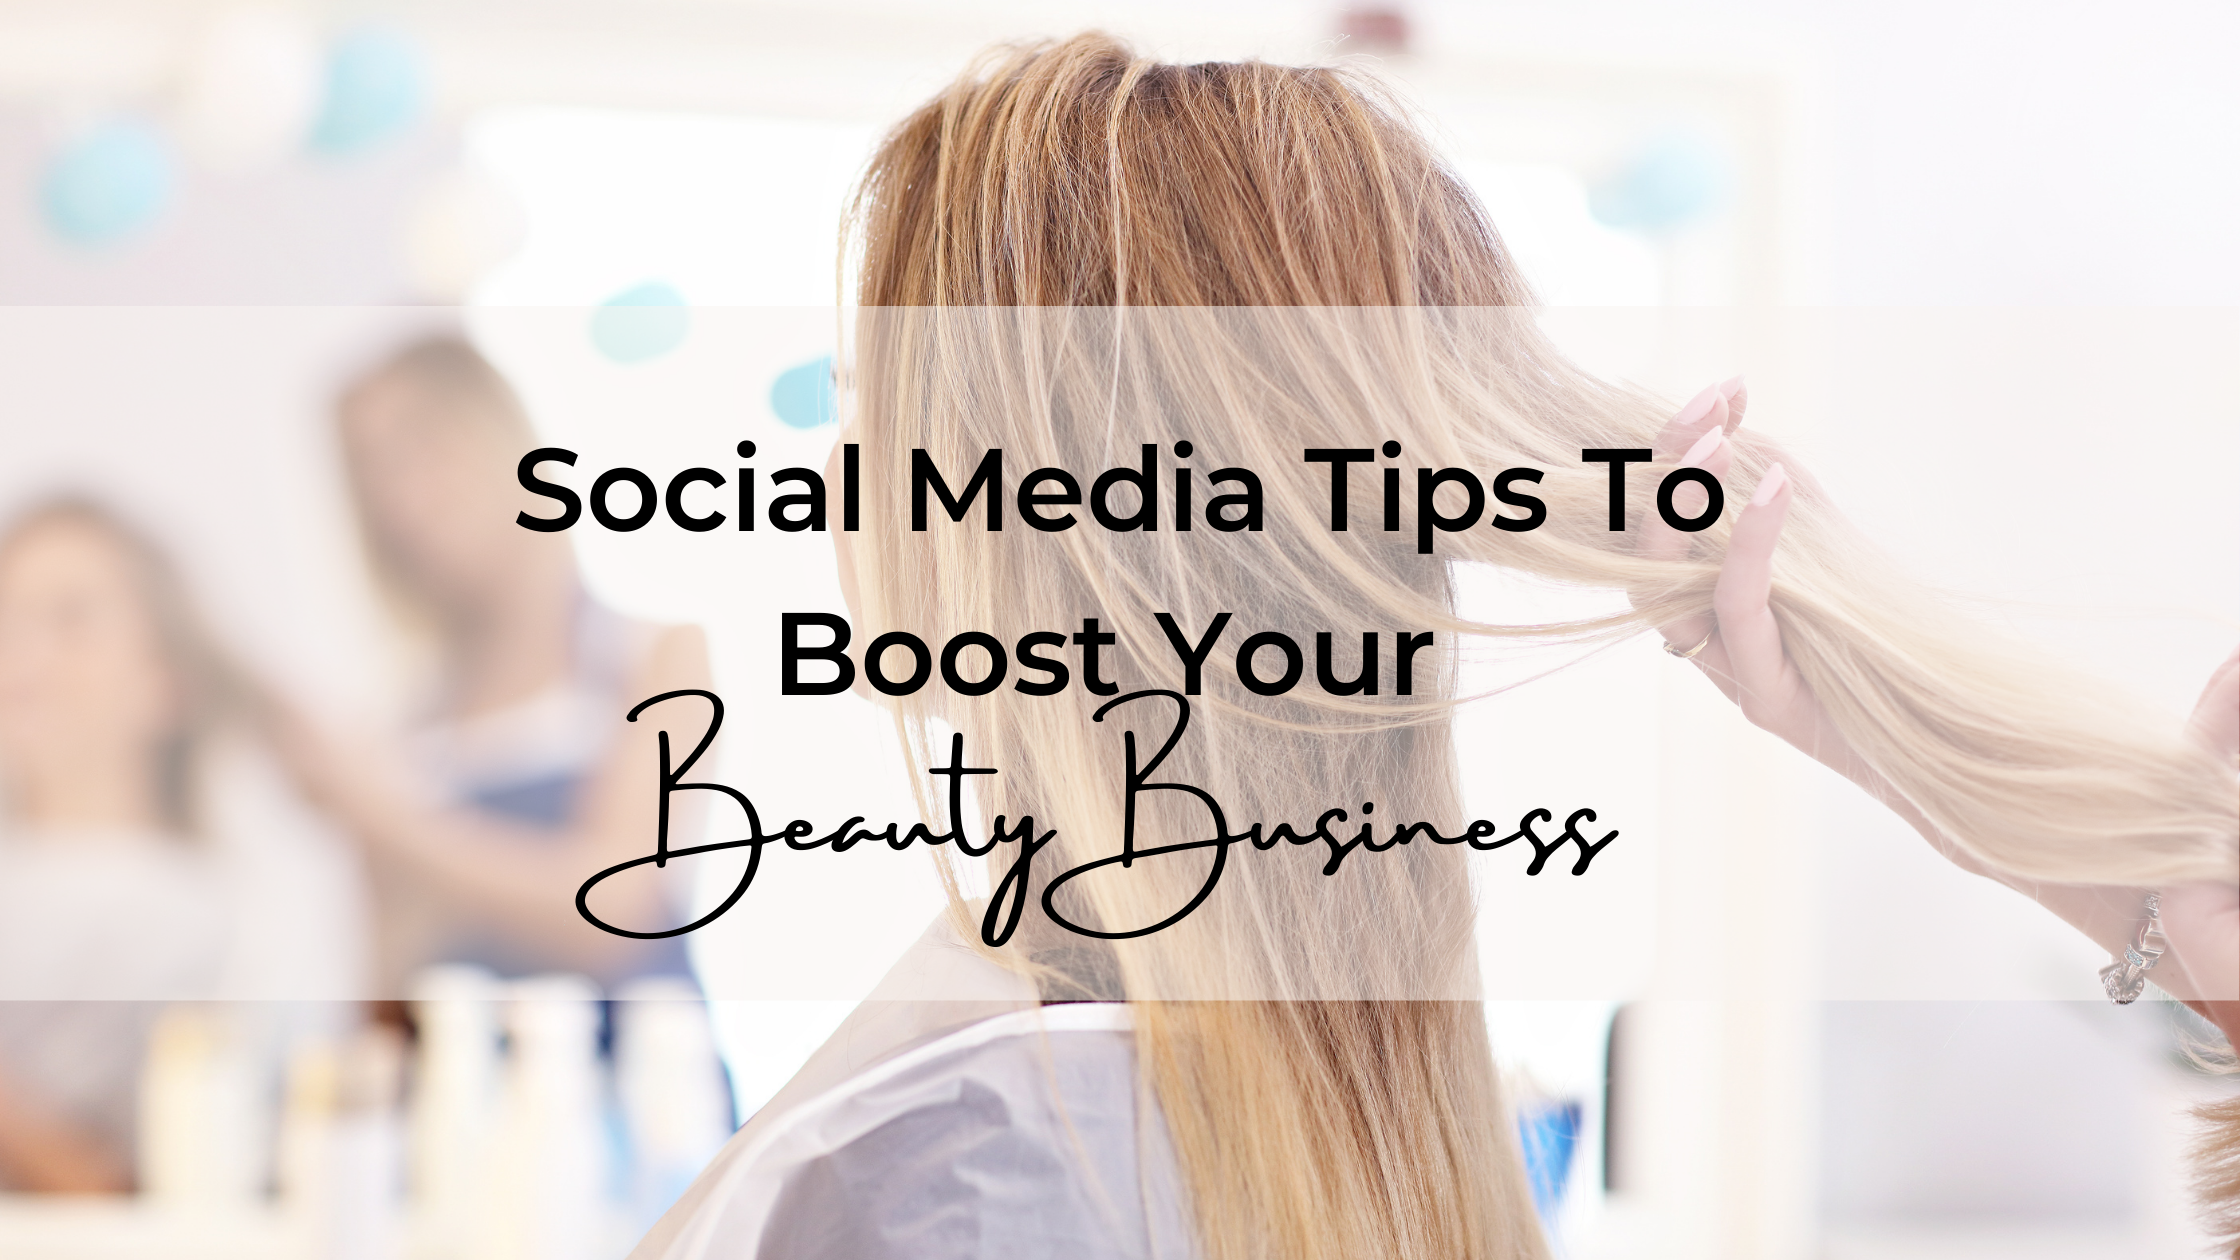 Social Media Tips To Boost Your Beauty Business - Jessica Campos